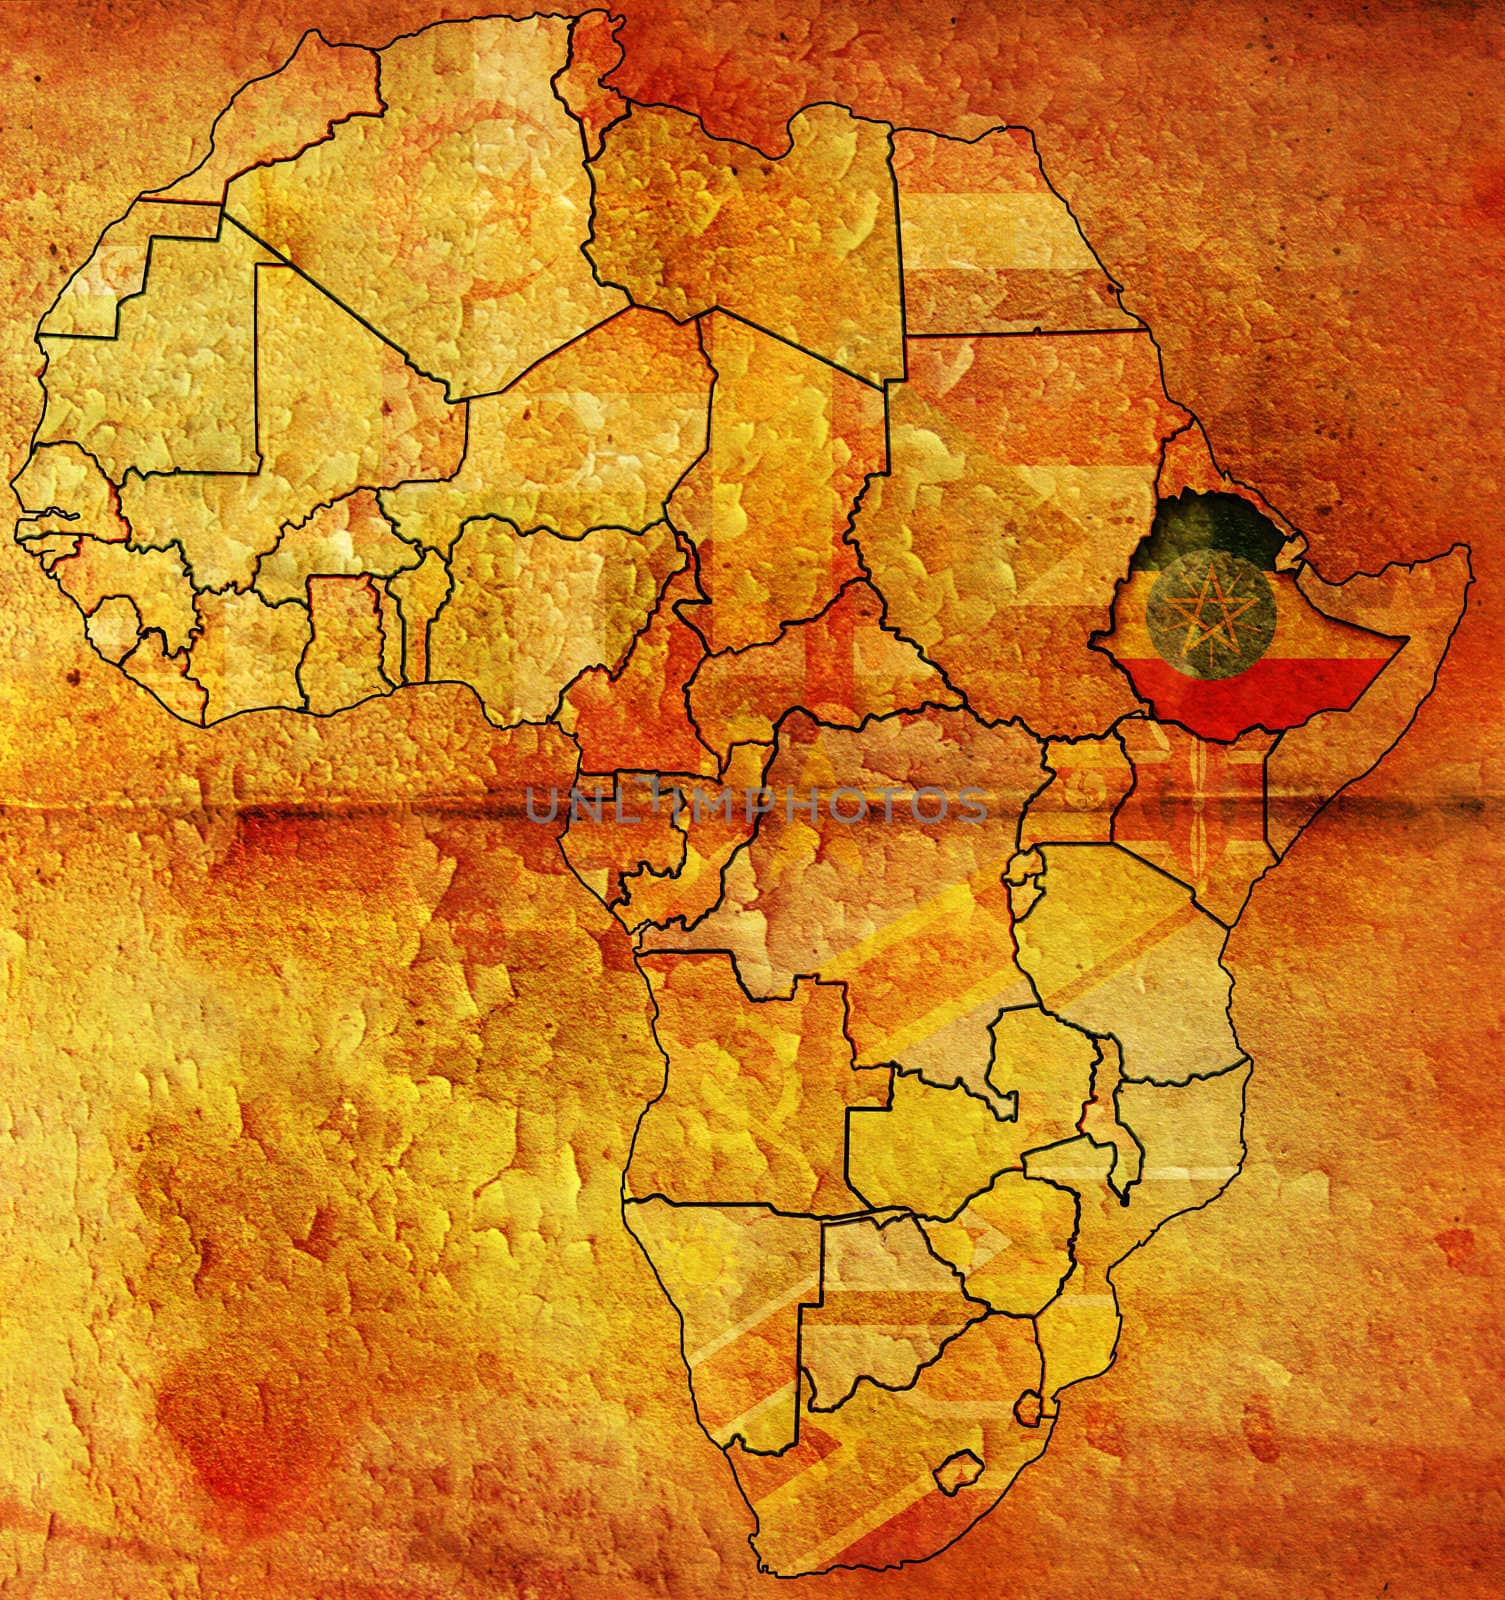 ethiophia on africa map by michal812